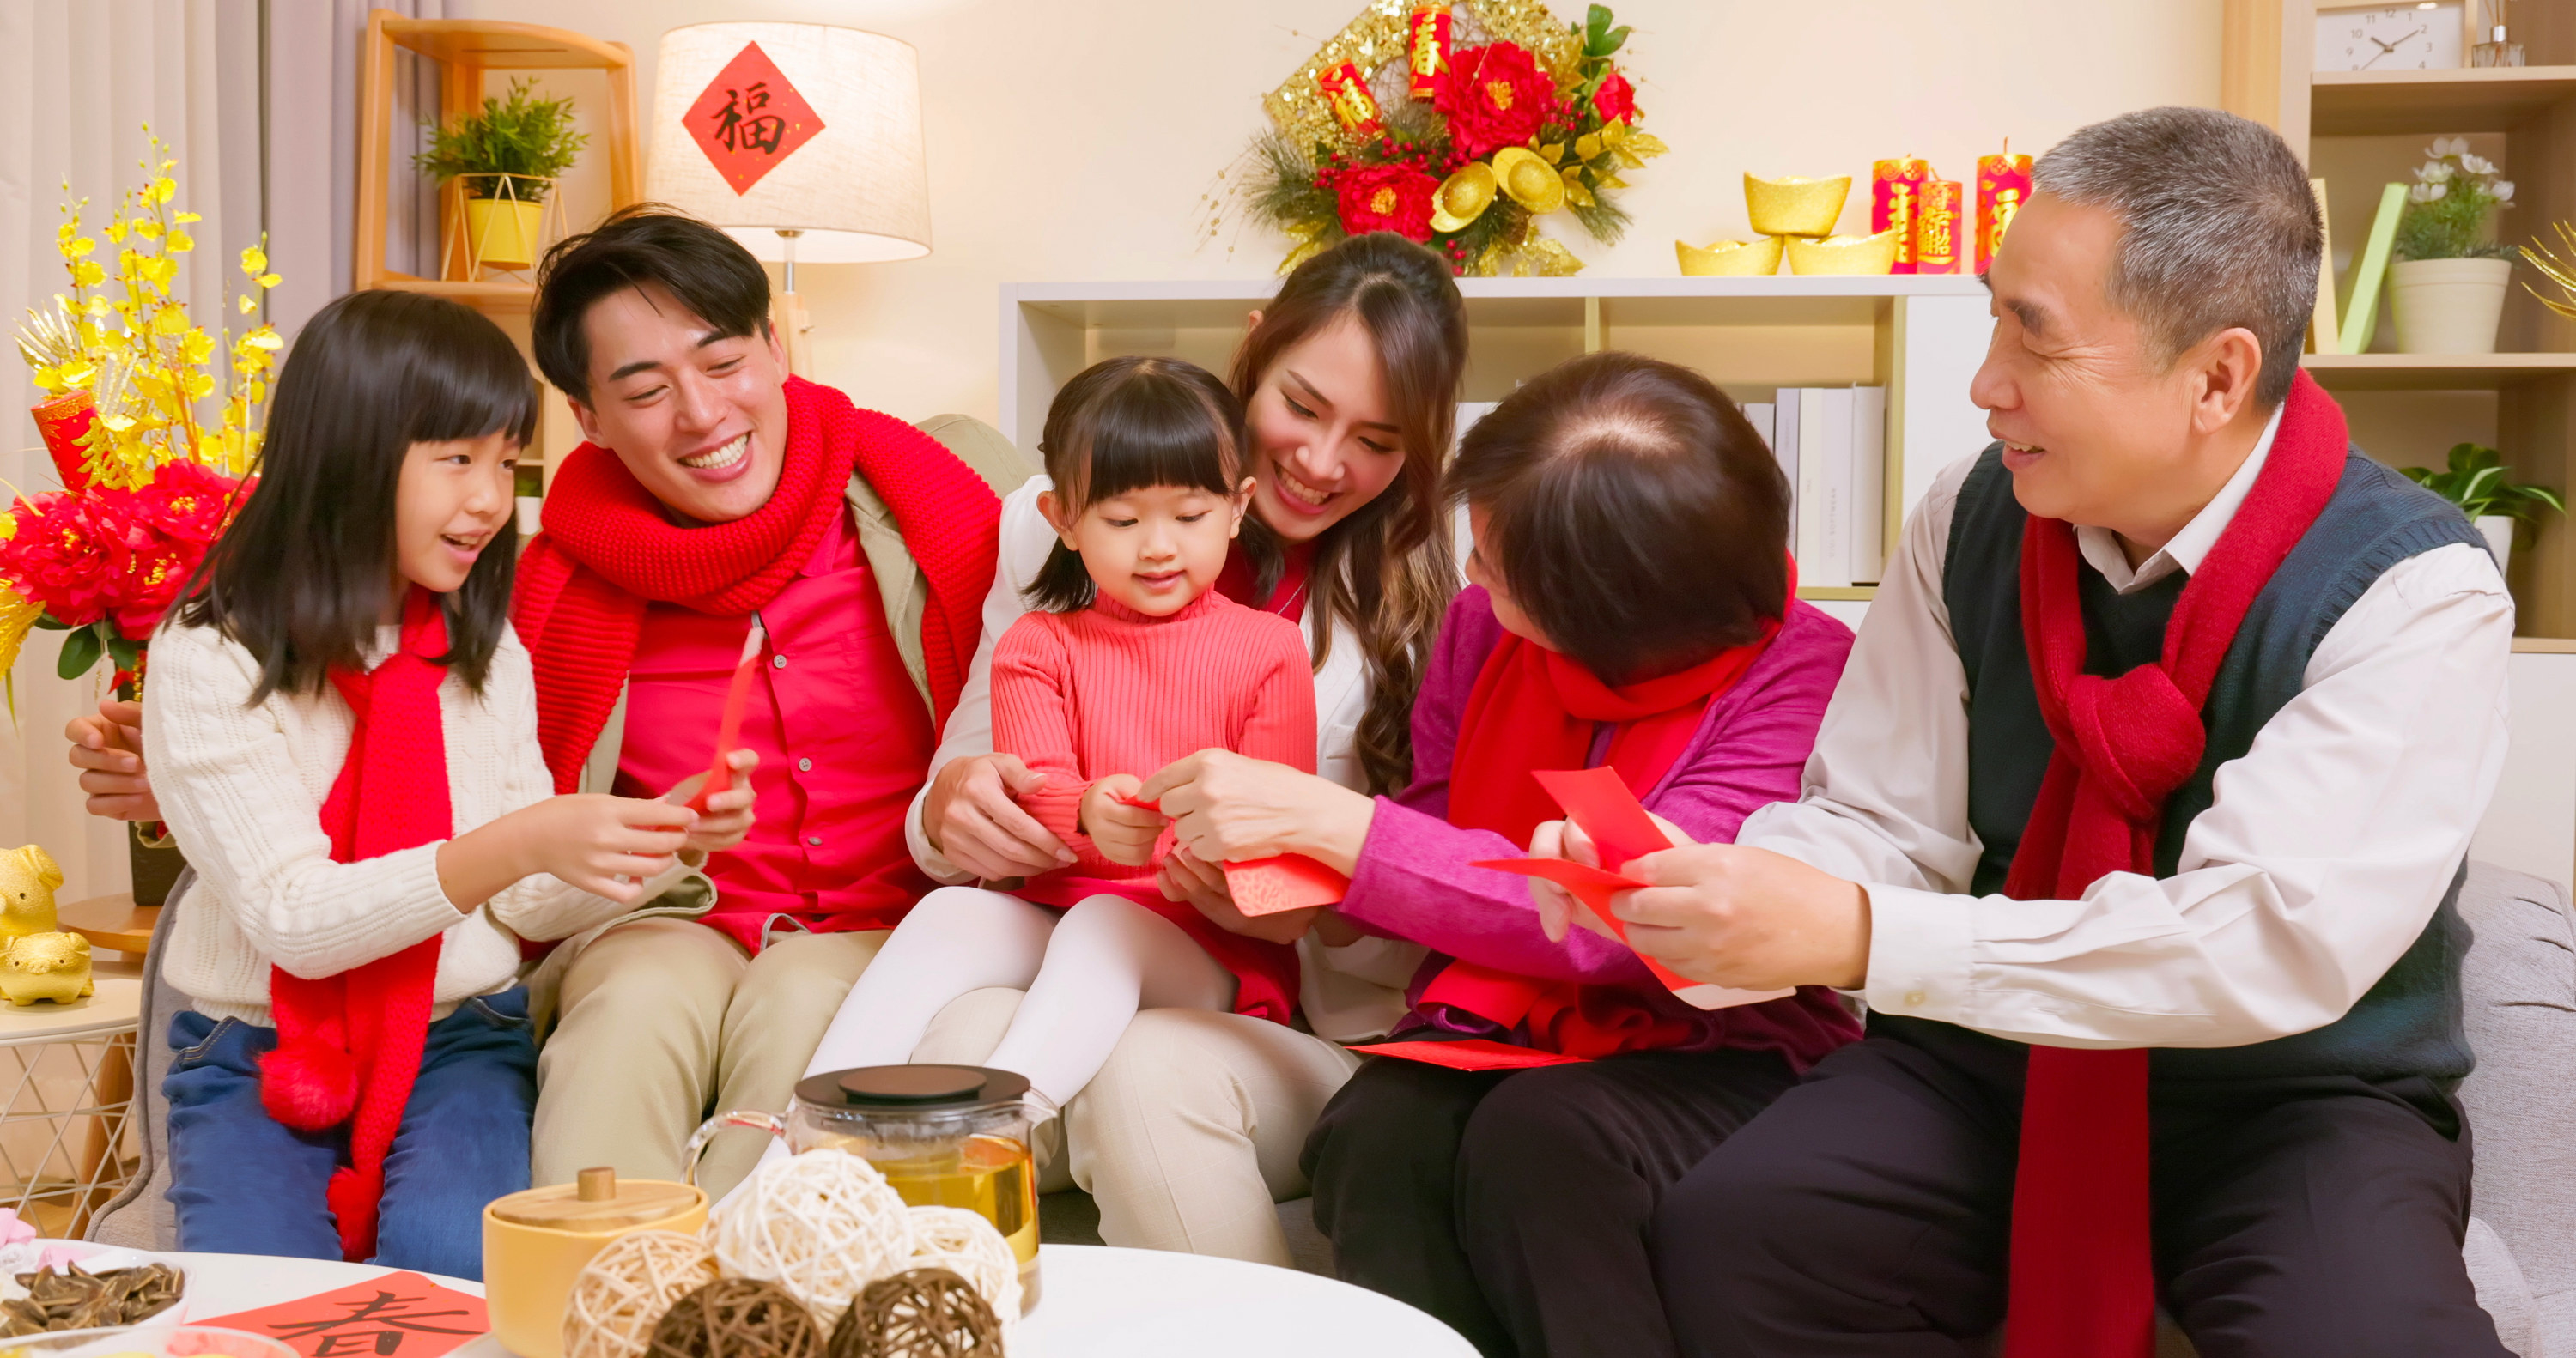 elderly couple grandparent giving red envelope lucky money to granddaughters and wishing them happy new year with hand gestures in living room